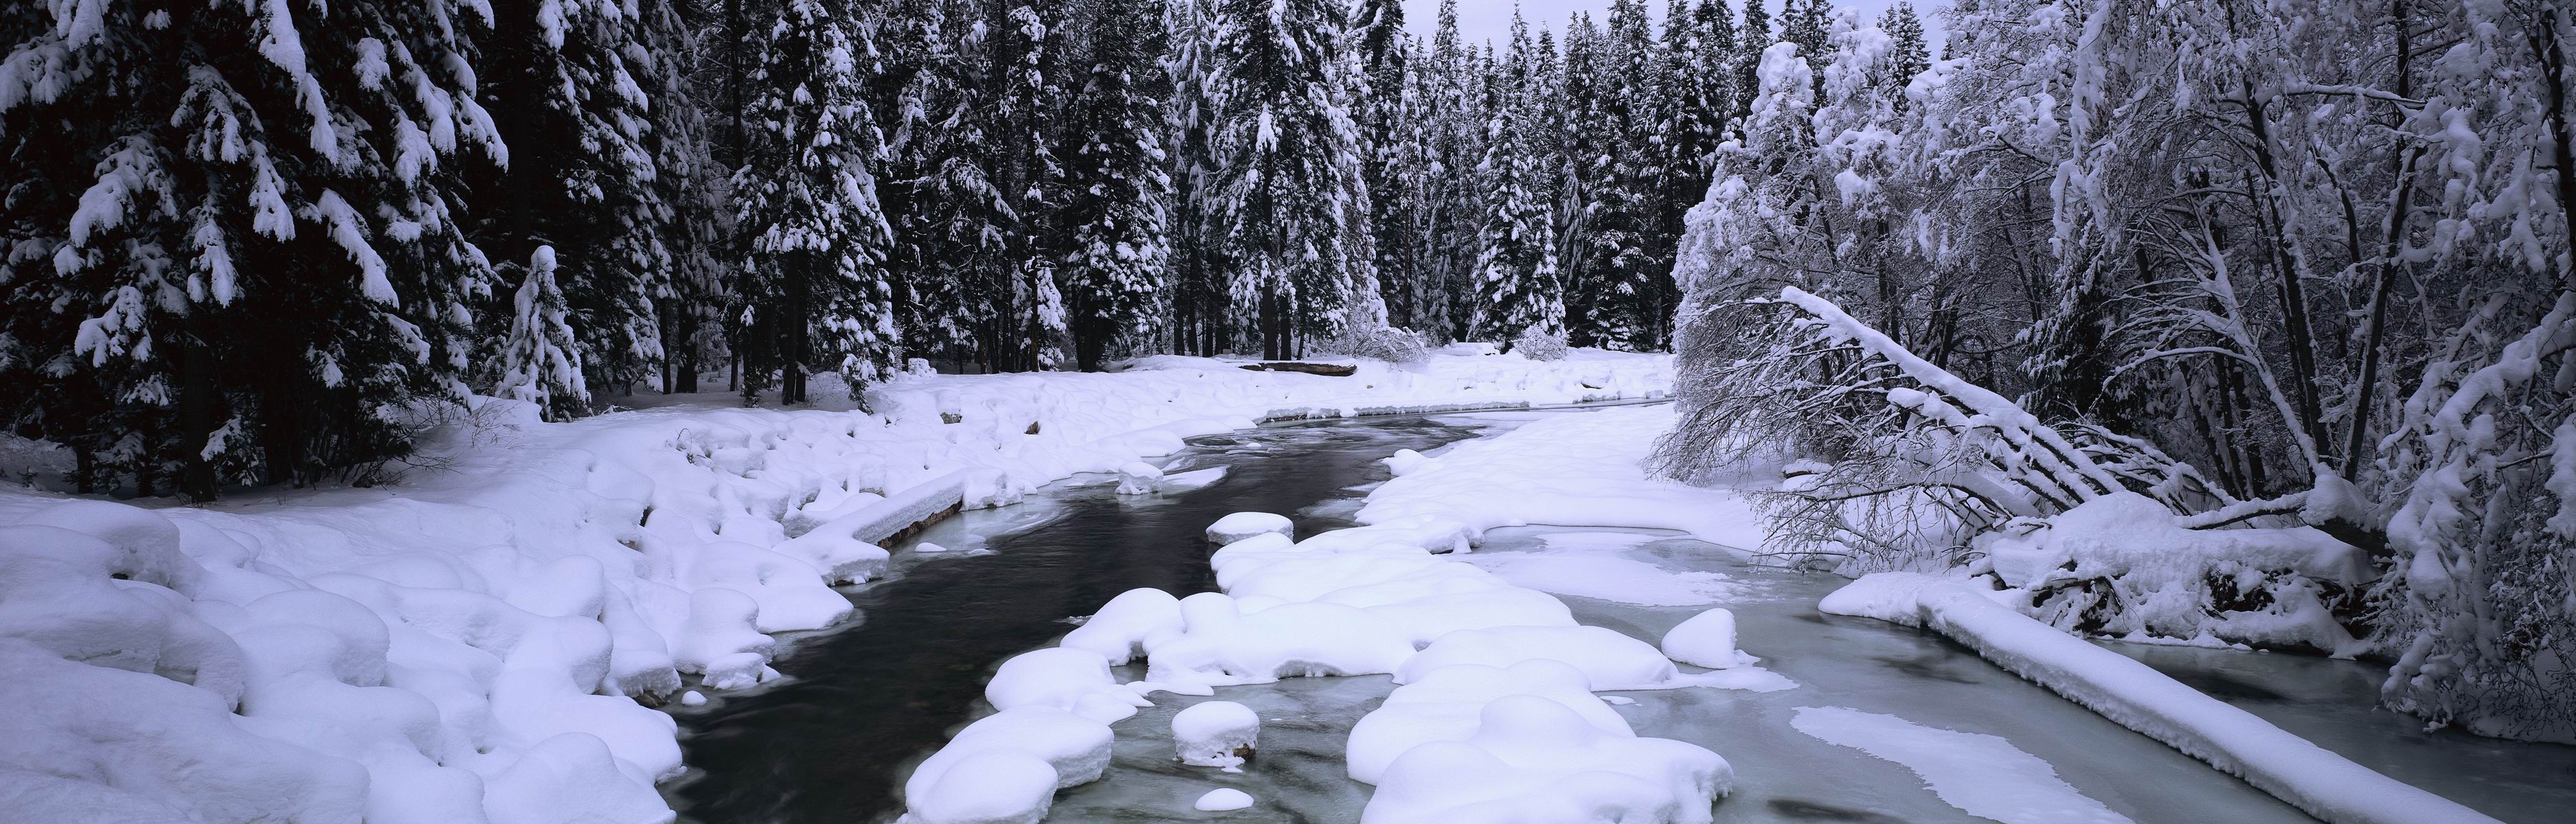 General 3750x1200 ice river forest snow trees nature